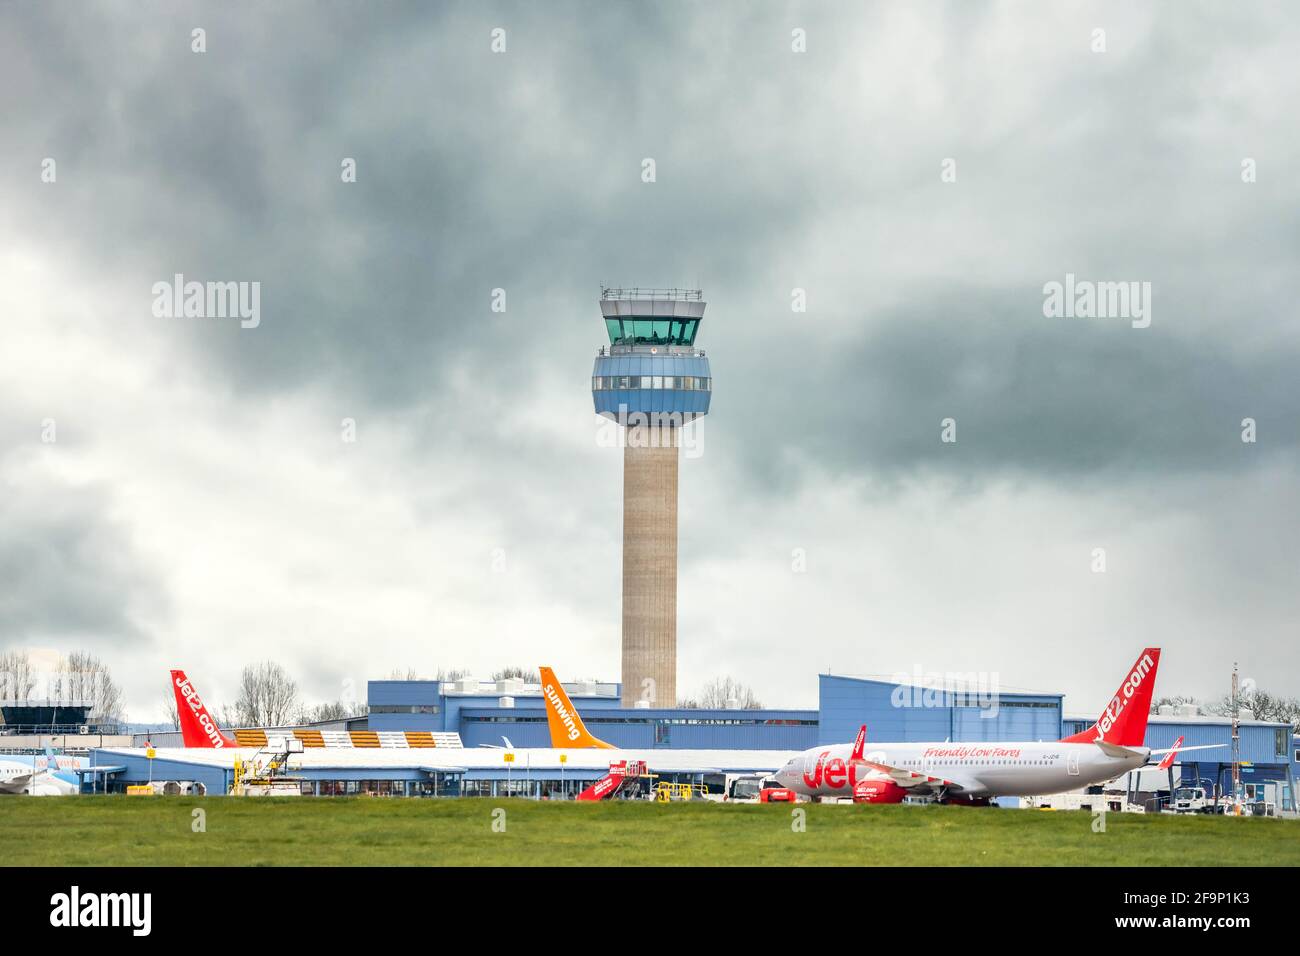 East Midlands Airport radio air traffic Control tower and aircraft planes waiting to depart modern terminal runway with stormy cloud sky behind. Stock Photo